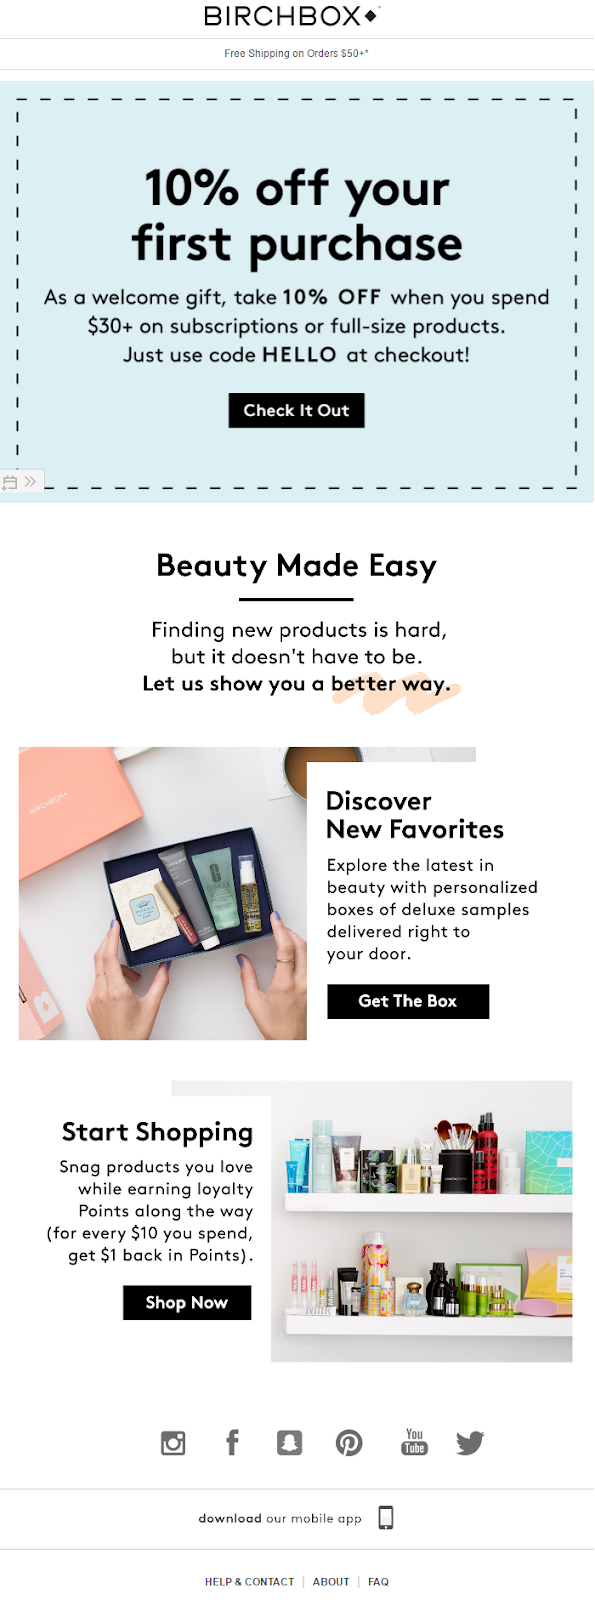 An email from Birchbox’s online store